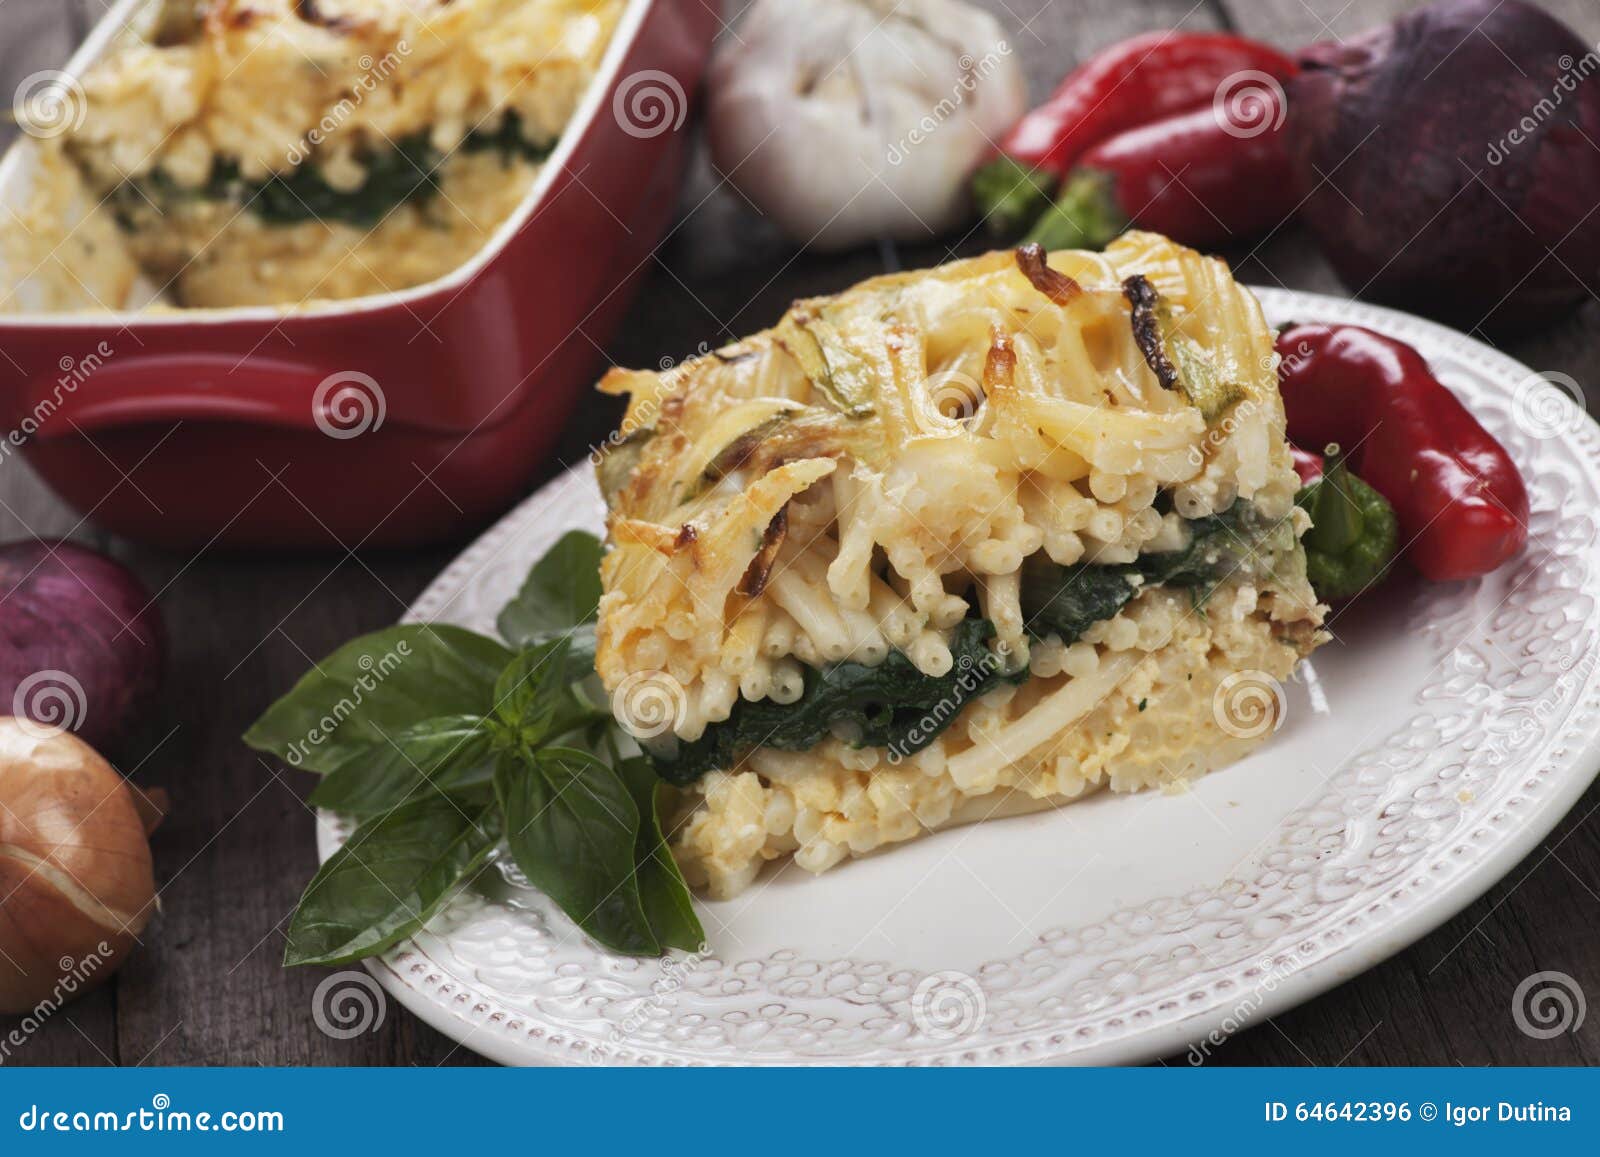 Pasticcio with Zucchini and Chard Stock Photo - Image of traditional ...